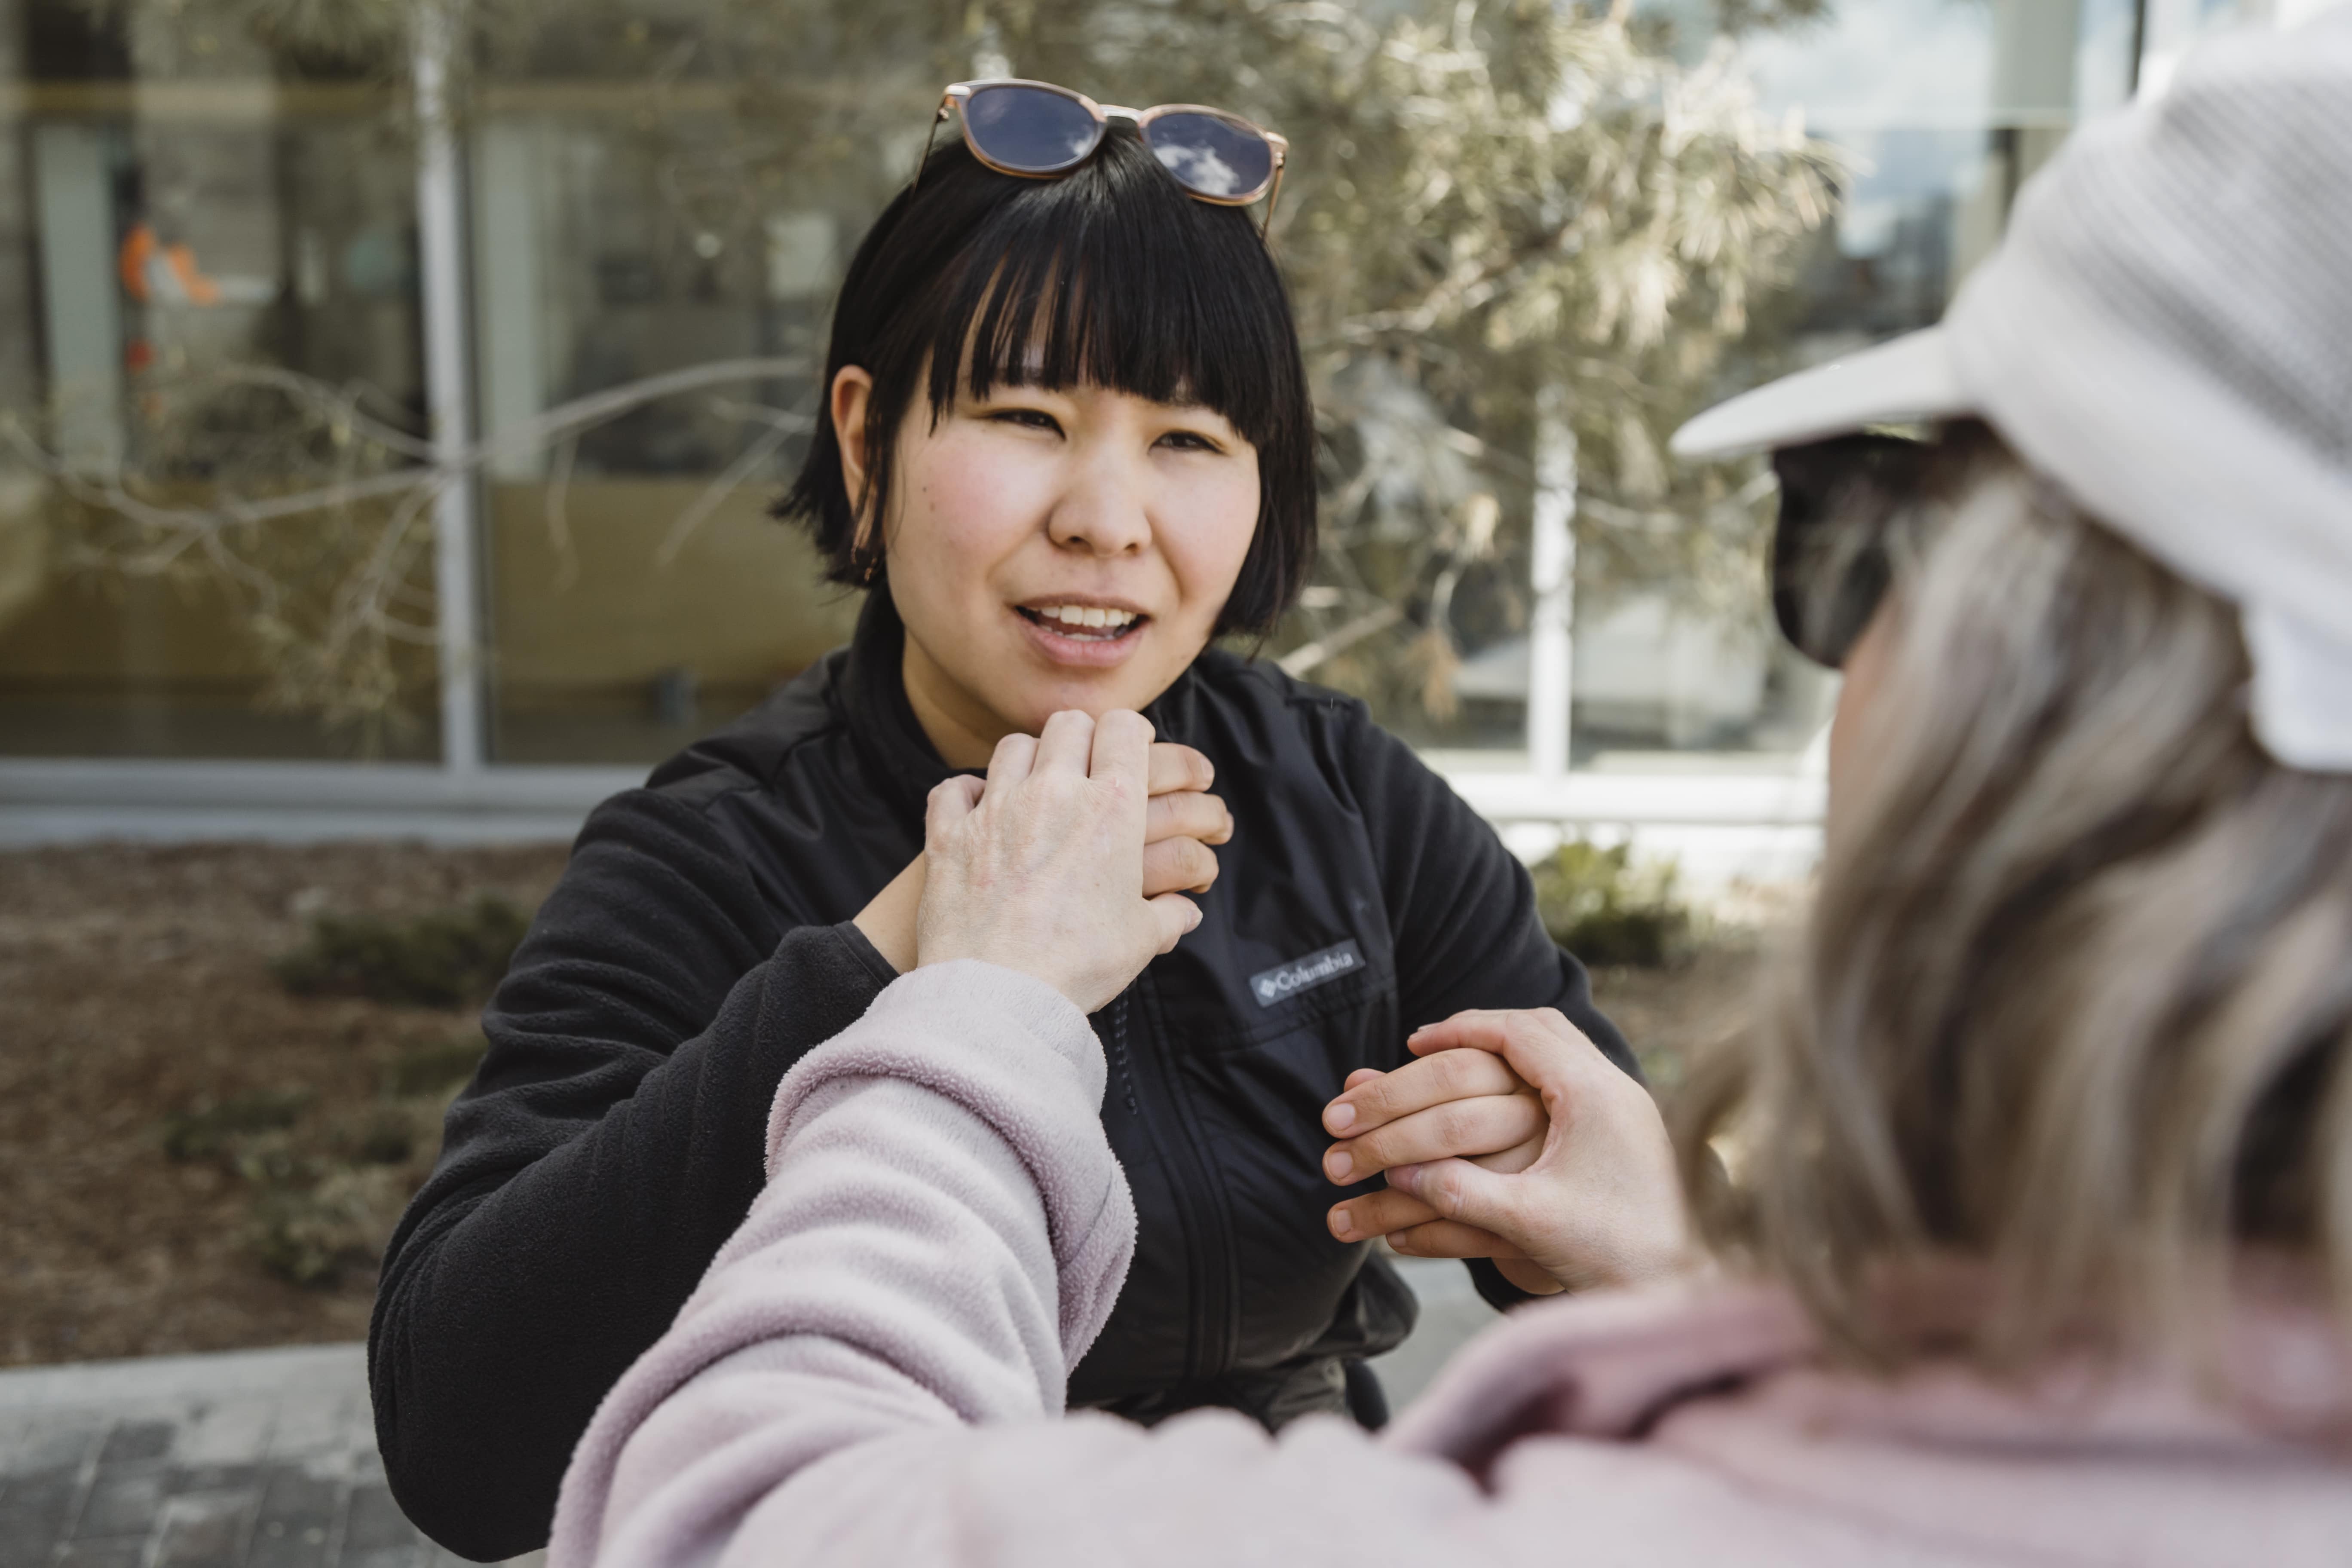 An intervenor uses tactile American sign language to have a conversation with a client.